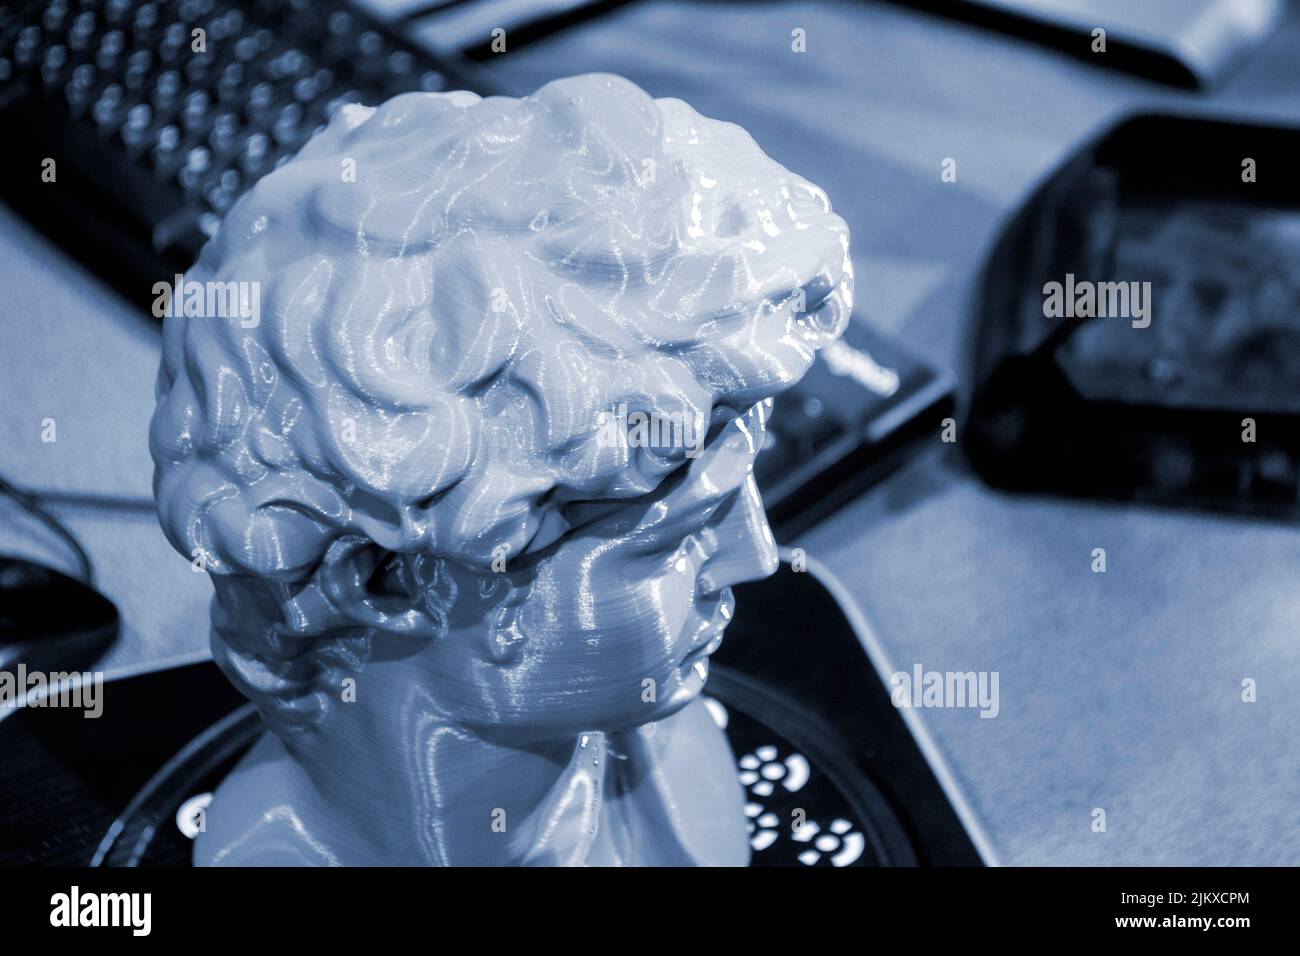 Gray human head on 3d printed close-up. An object prototype of a human head with hair printed by a 3D printer stands on a table. New modern additive 3D printing technology. Fused deposition modeling Stock Photo